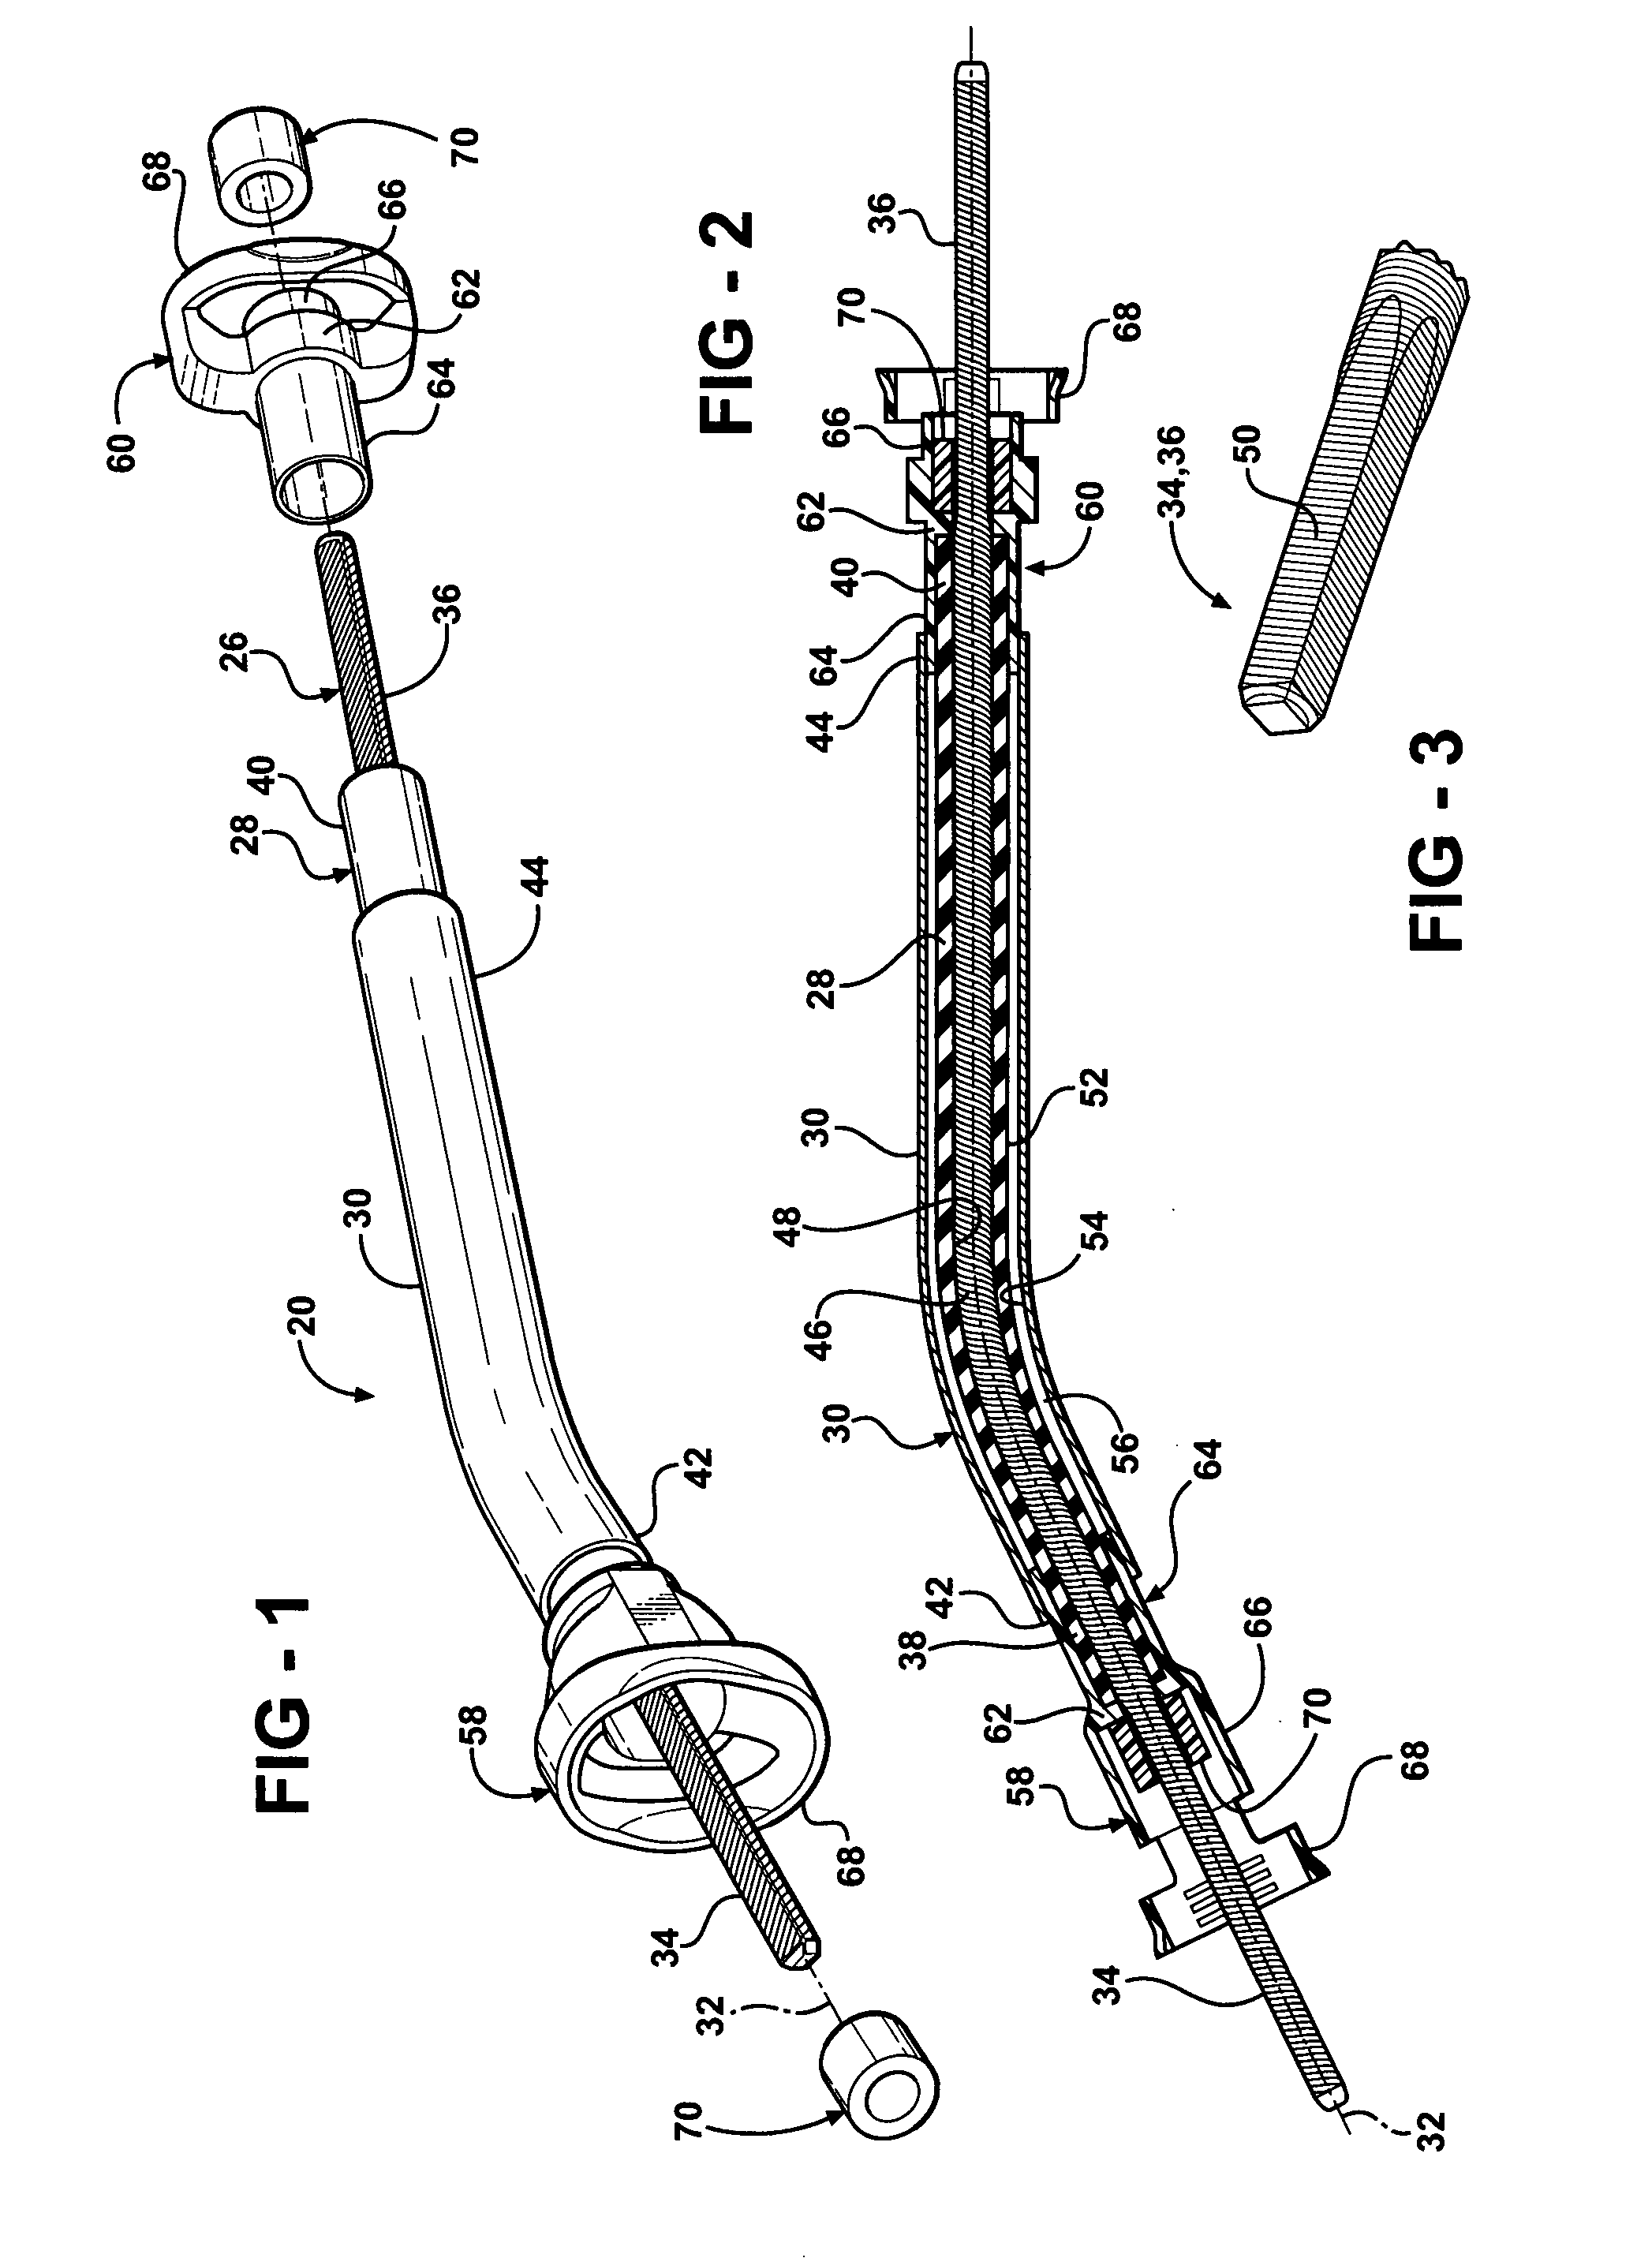 Steering column assembly having a rotating drive cable device